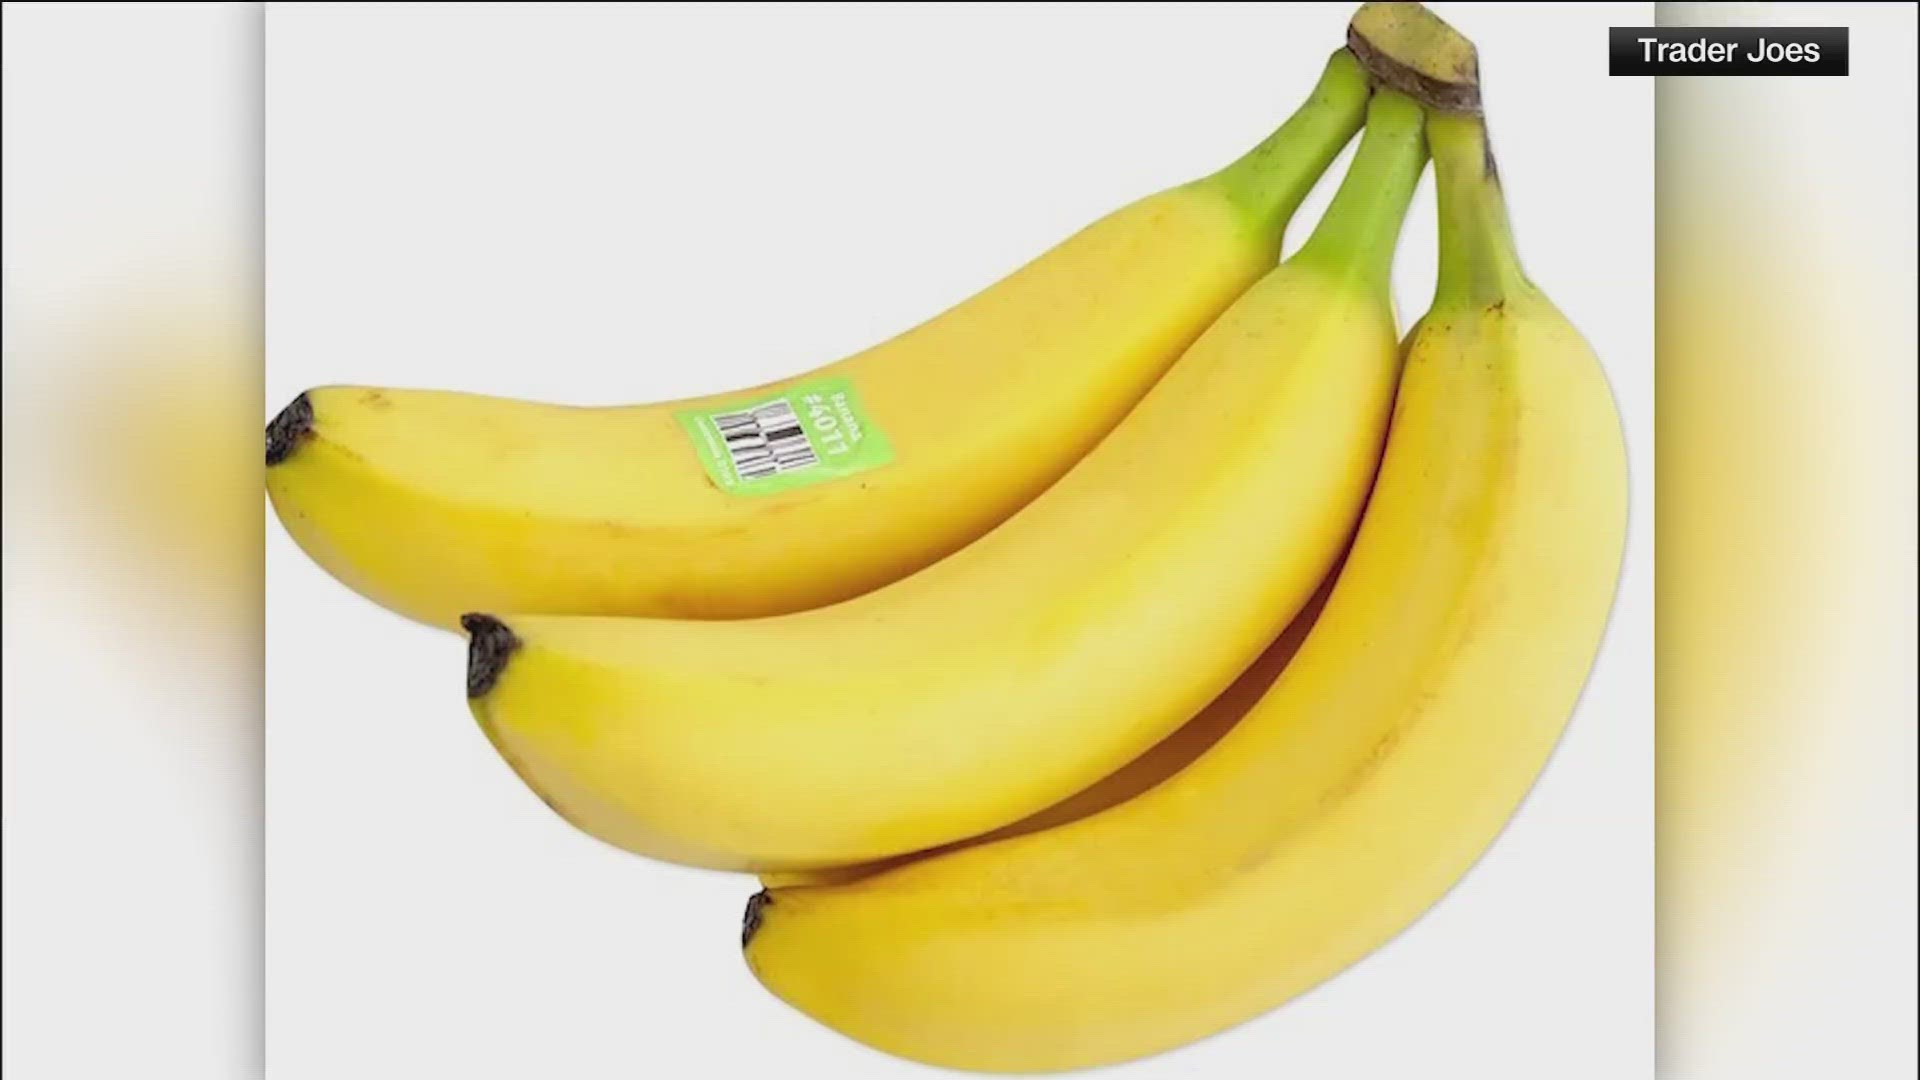 Trader Joe's raised its price of bananas from 19 cents to 23 cents each.